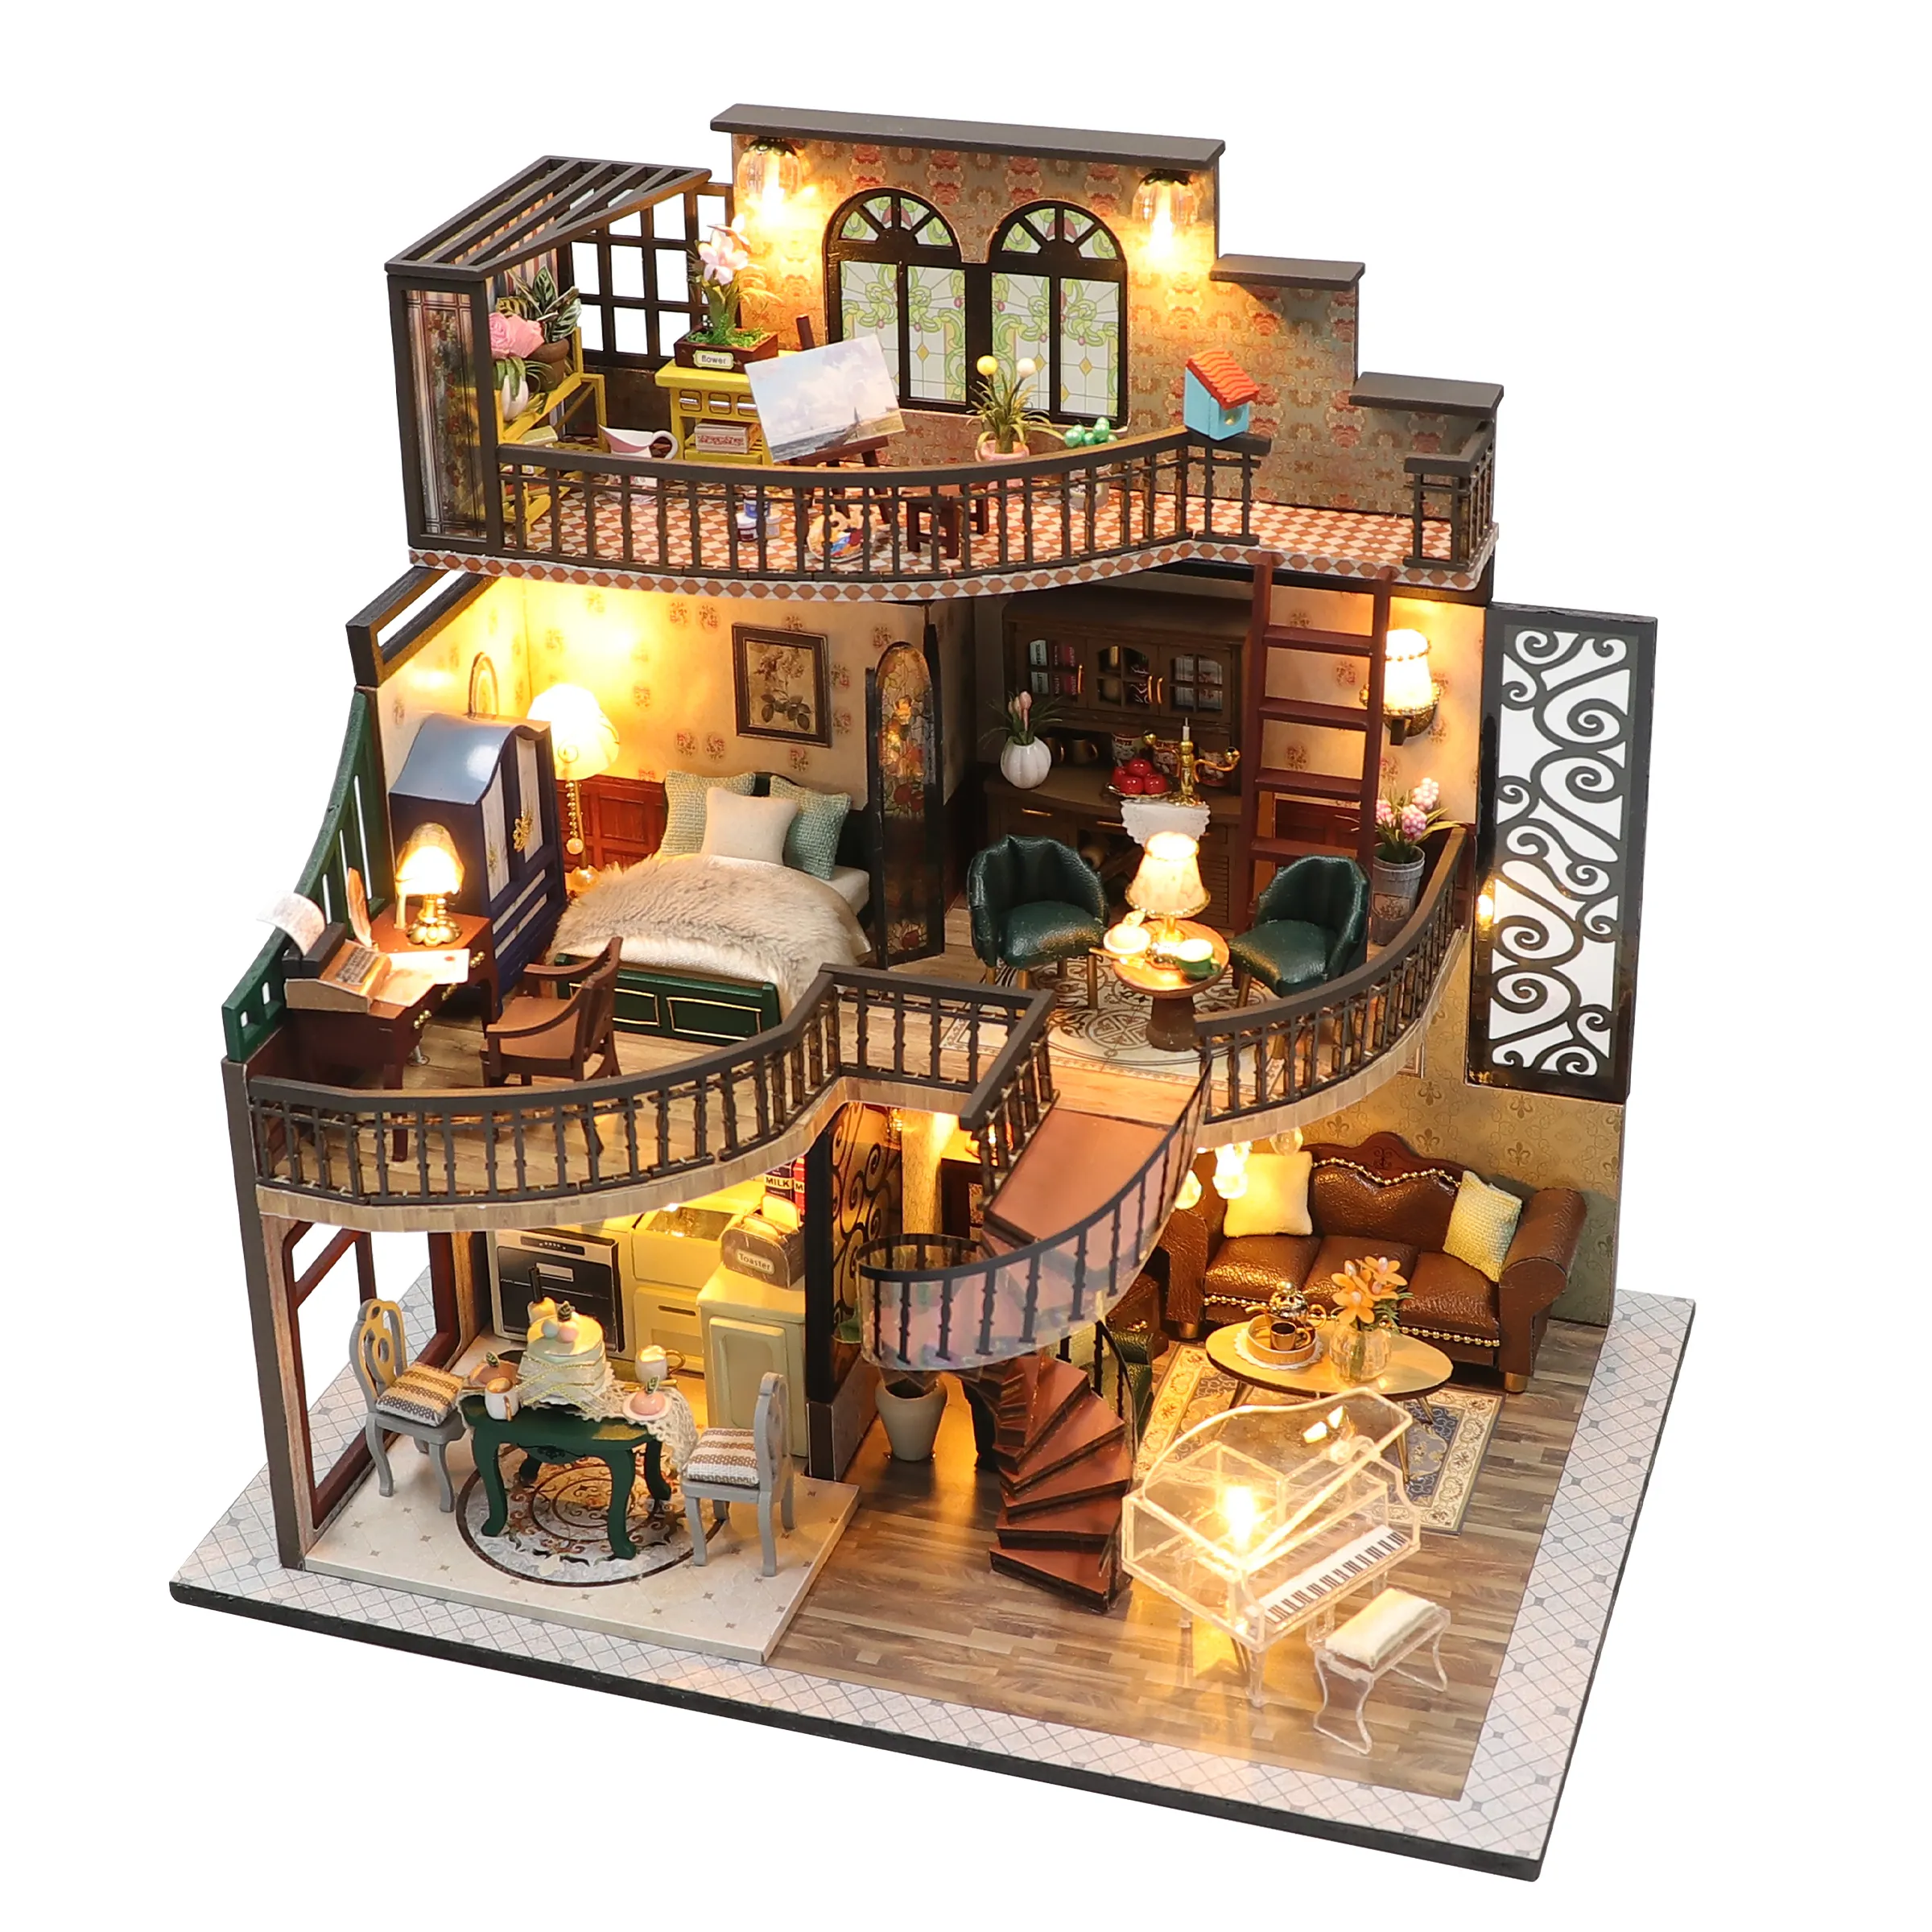 Best Selling 3D Wooden Retro Style Crafts DIY Miniature Furniture Dollhouse Doll Houses For Girls